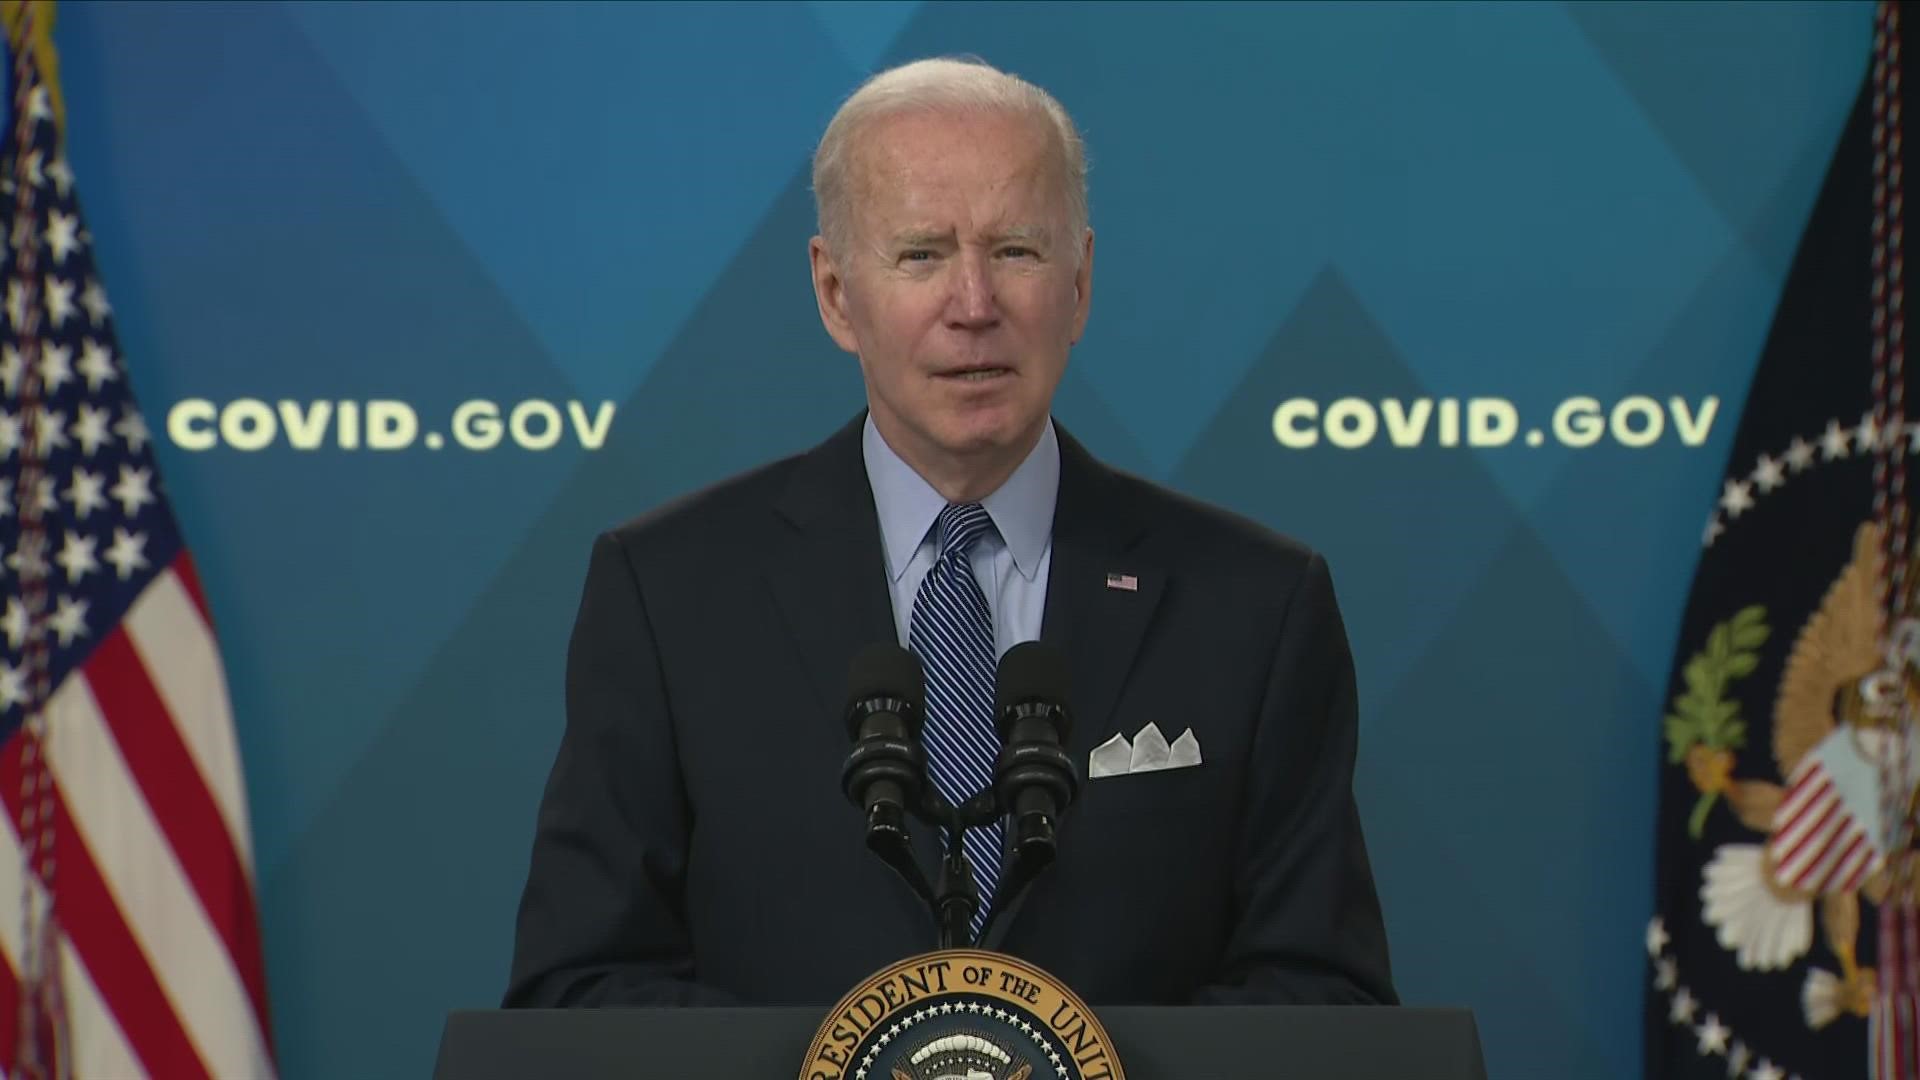 President Joe Biden discusses "new moment in the pandemic" as U.S. launches one-stop website to help access tests, vaccines, treatments.